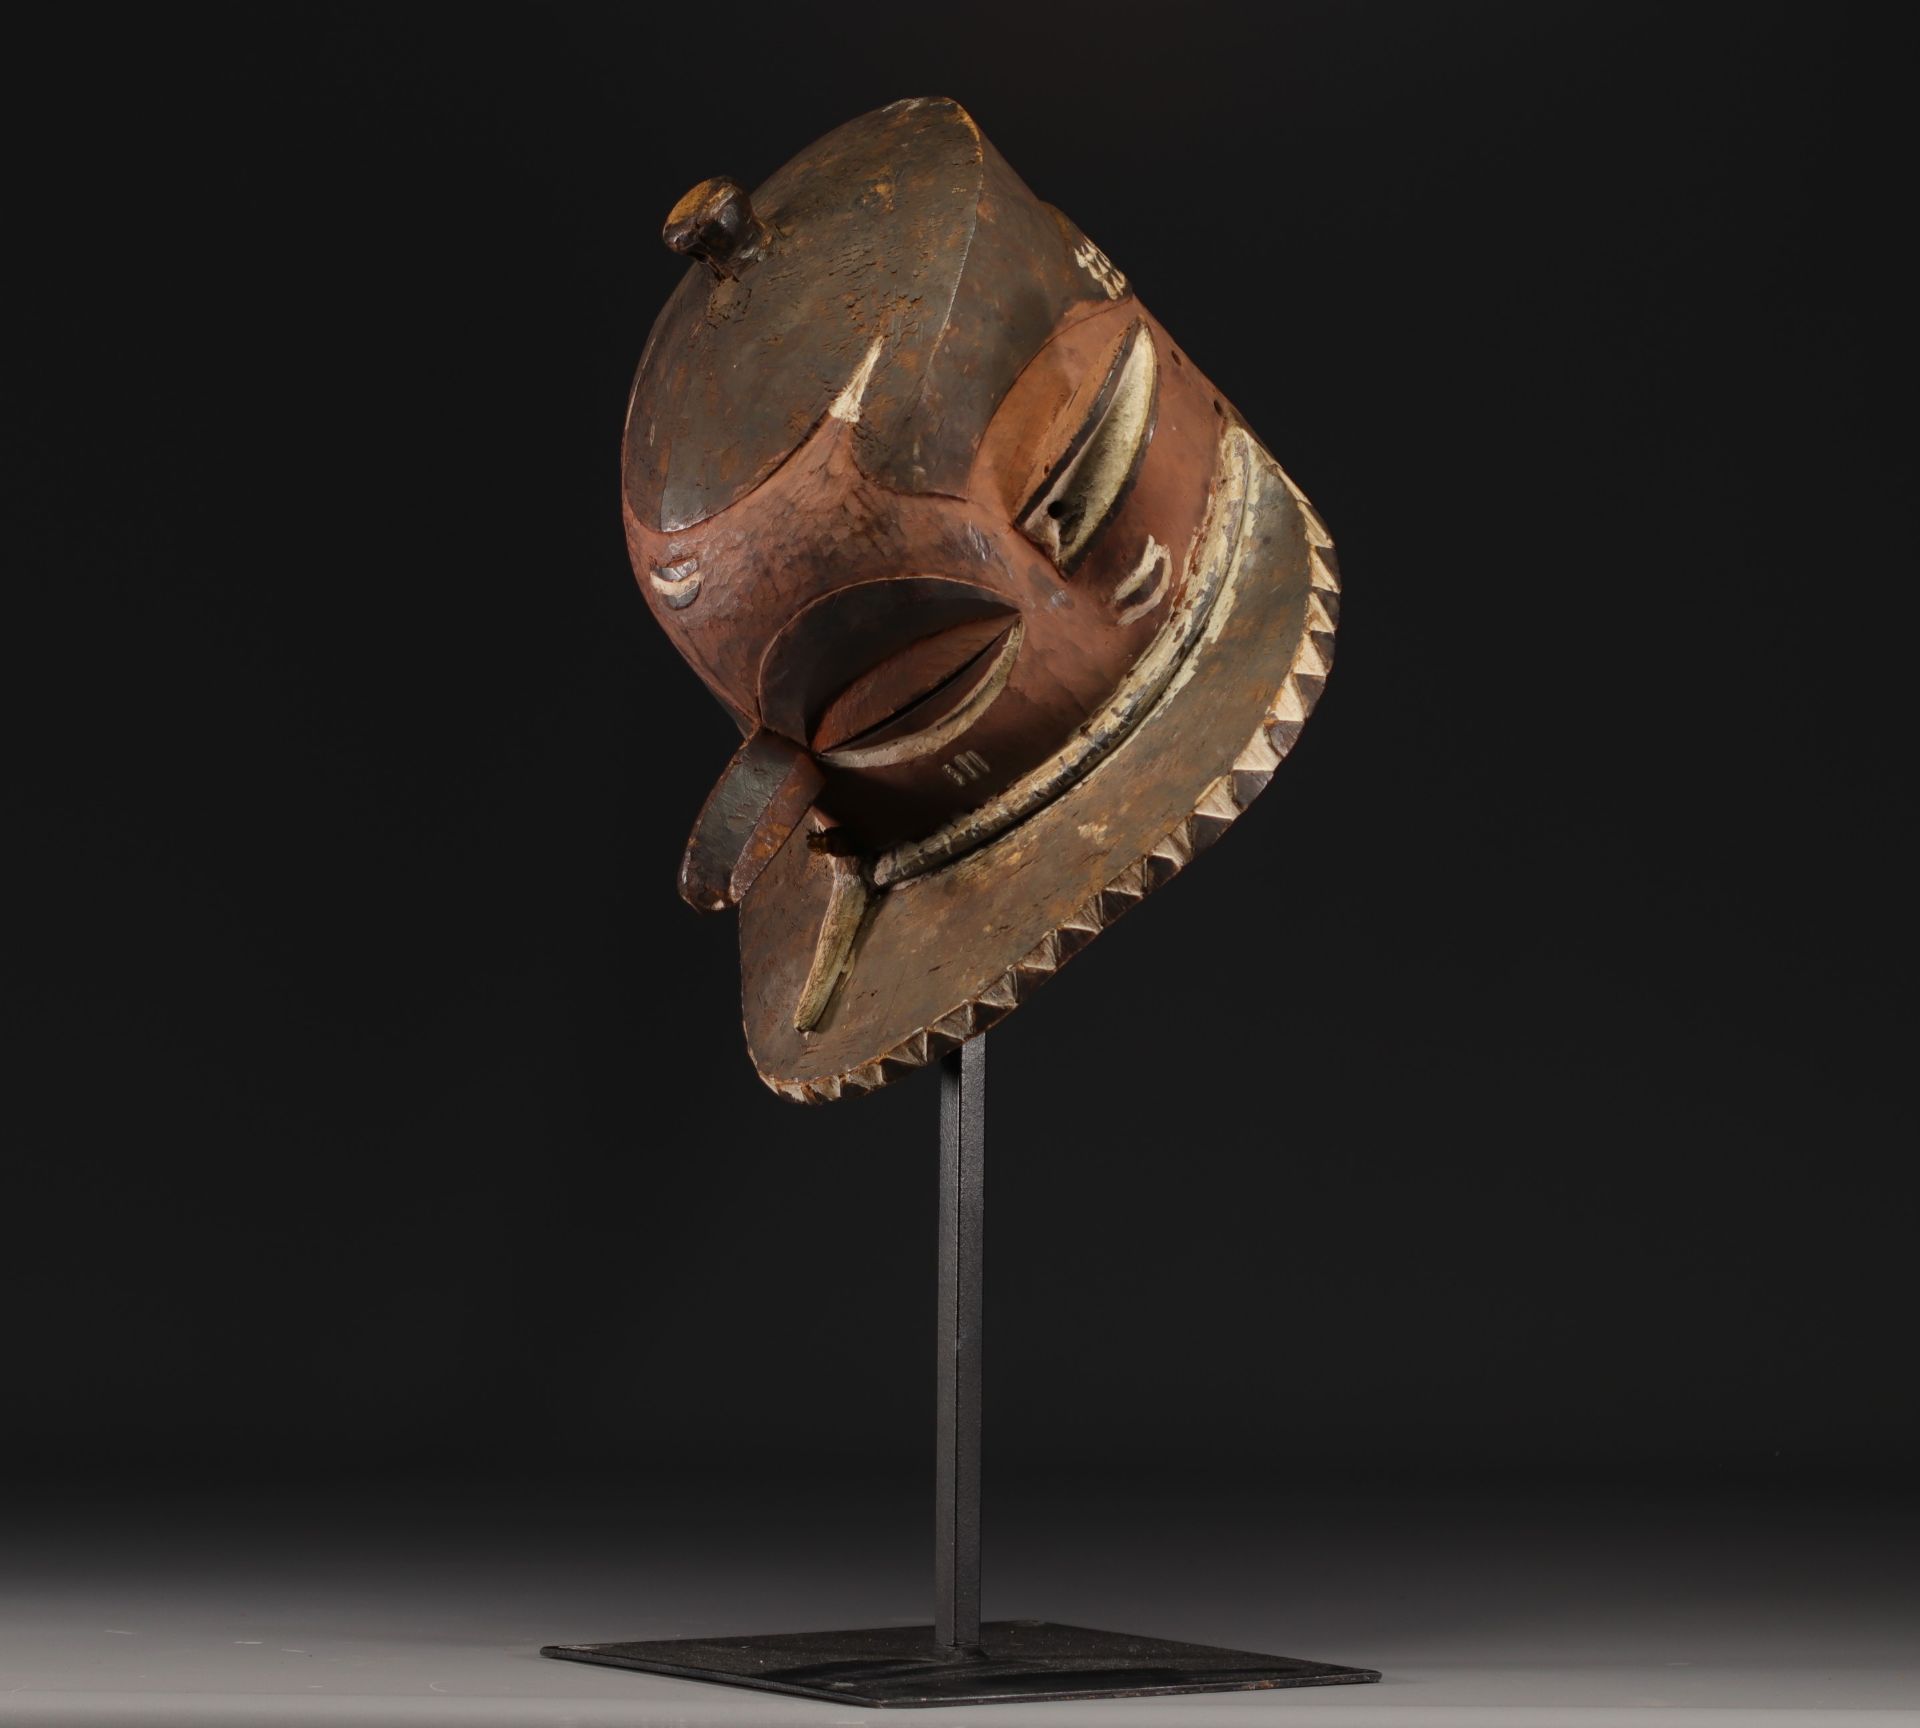 Eastern Pende mask - Dem.Rep.Congo - Image 6 of 7